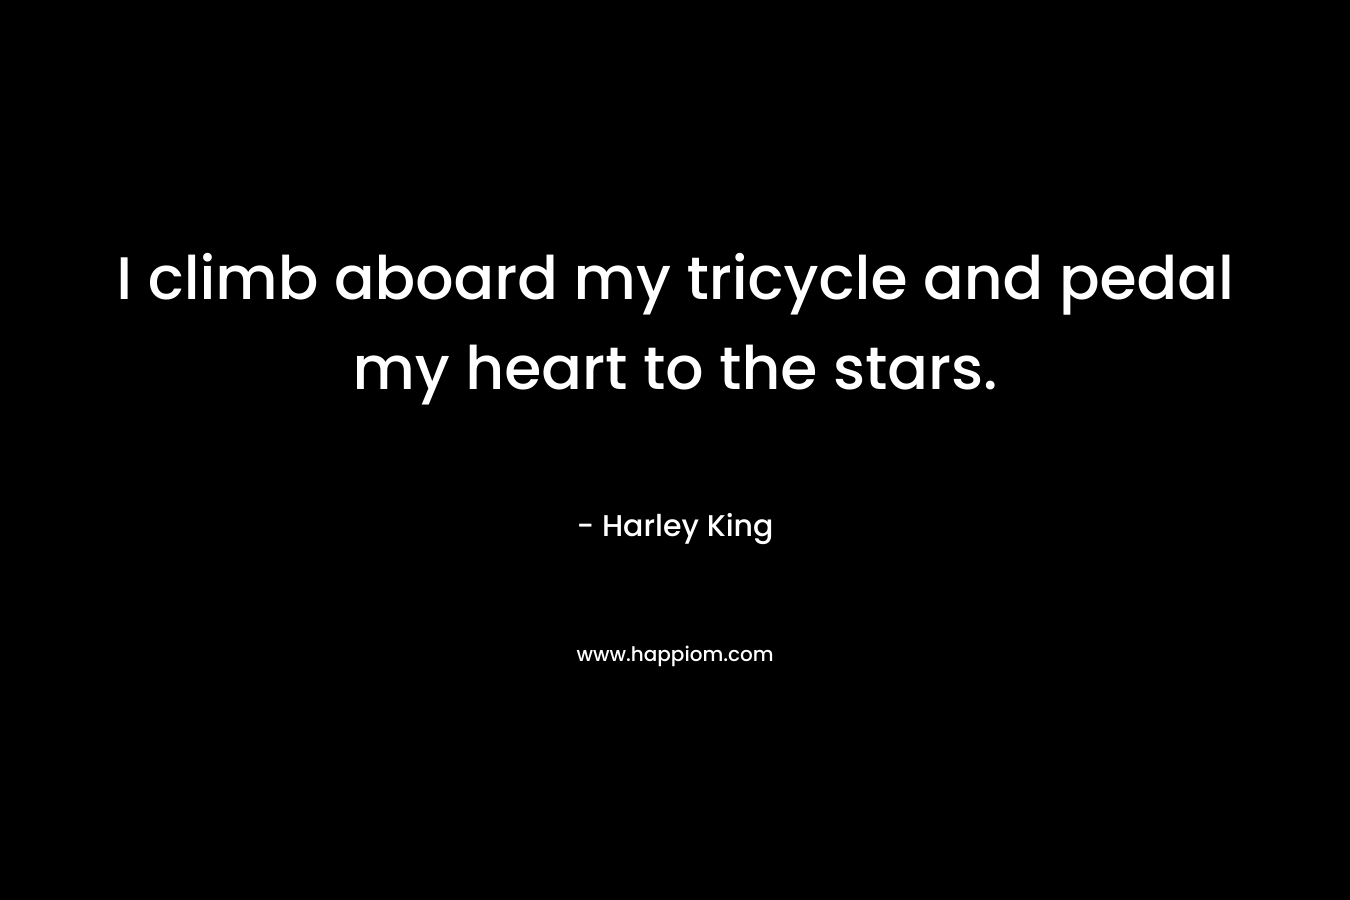 I climb aboard my tricycle and pedal my heart to the stars.